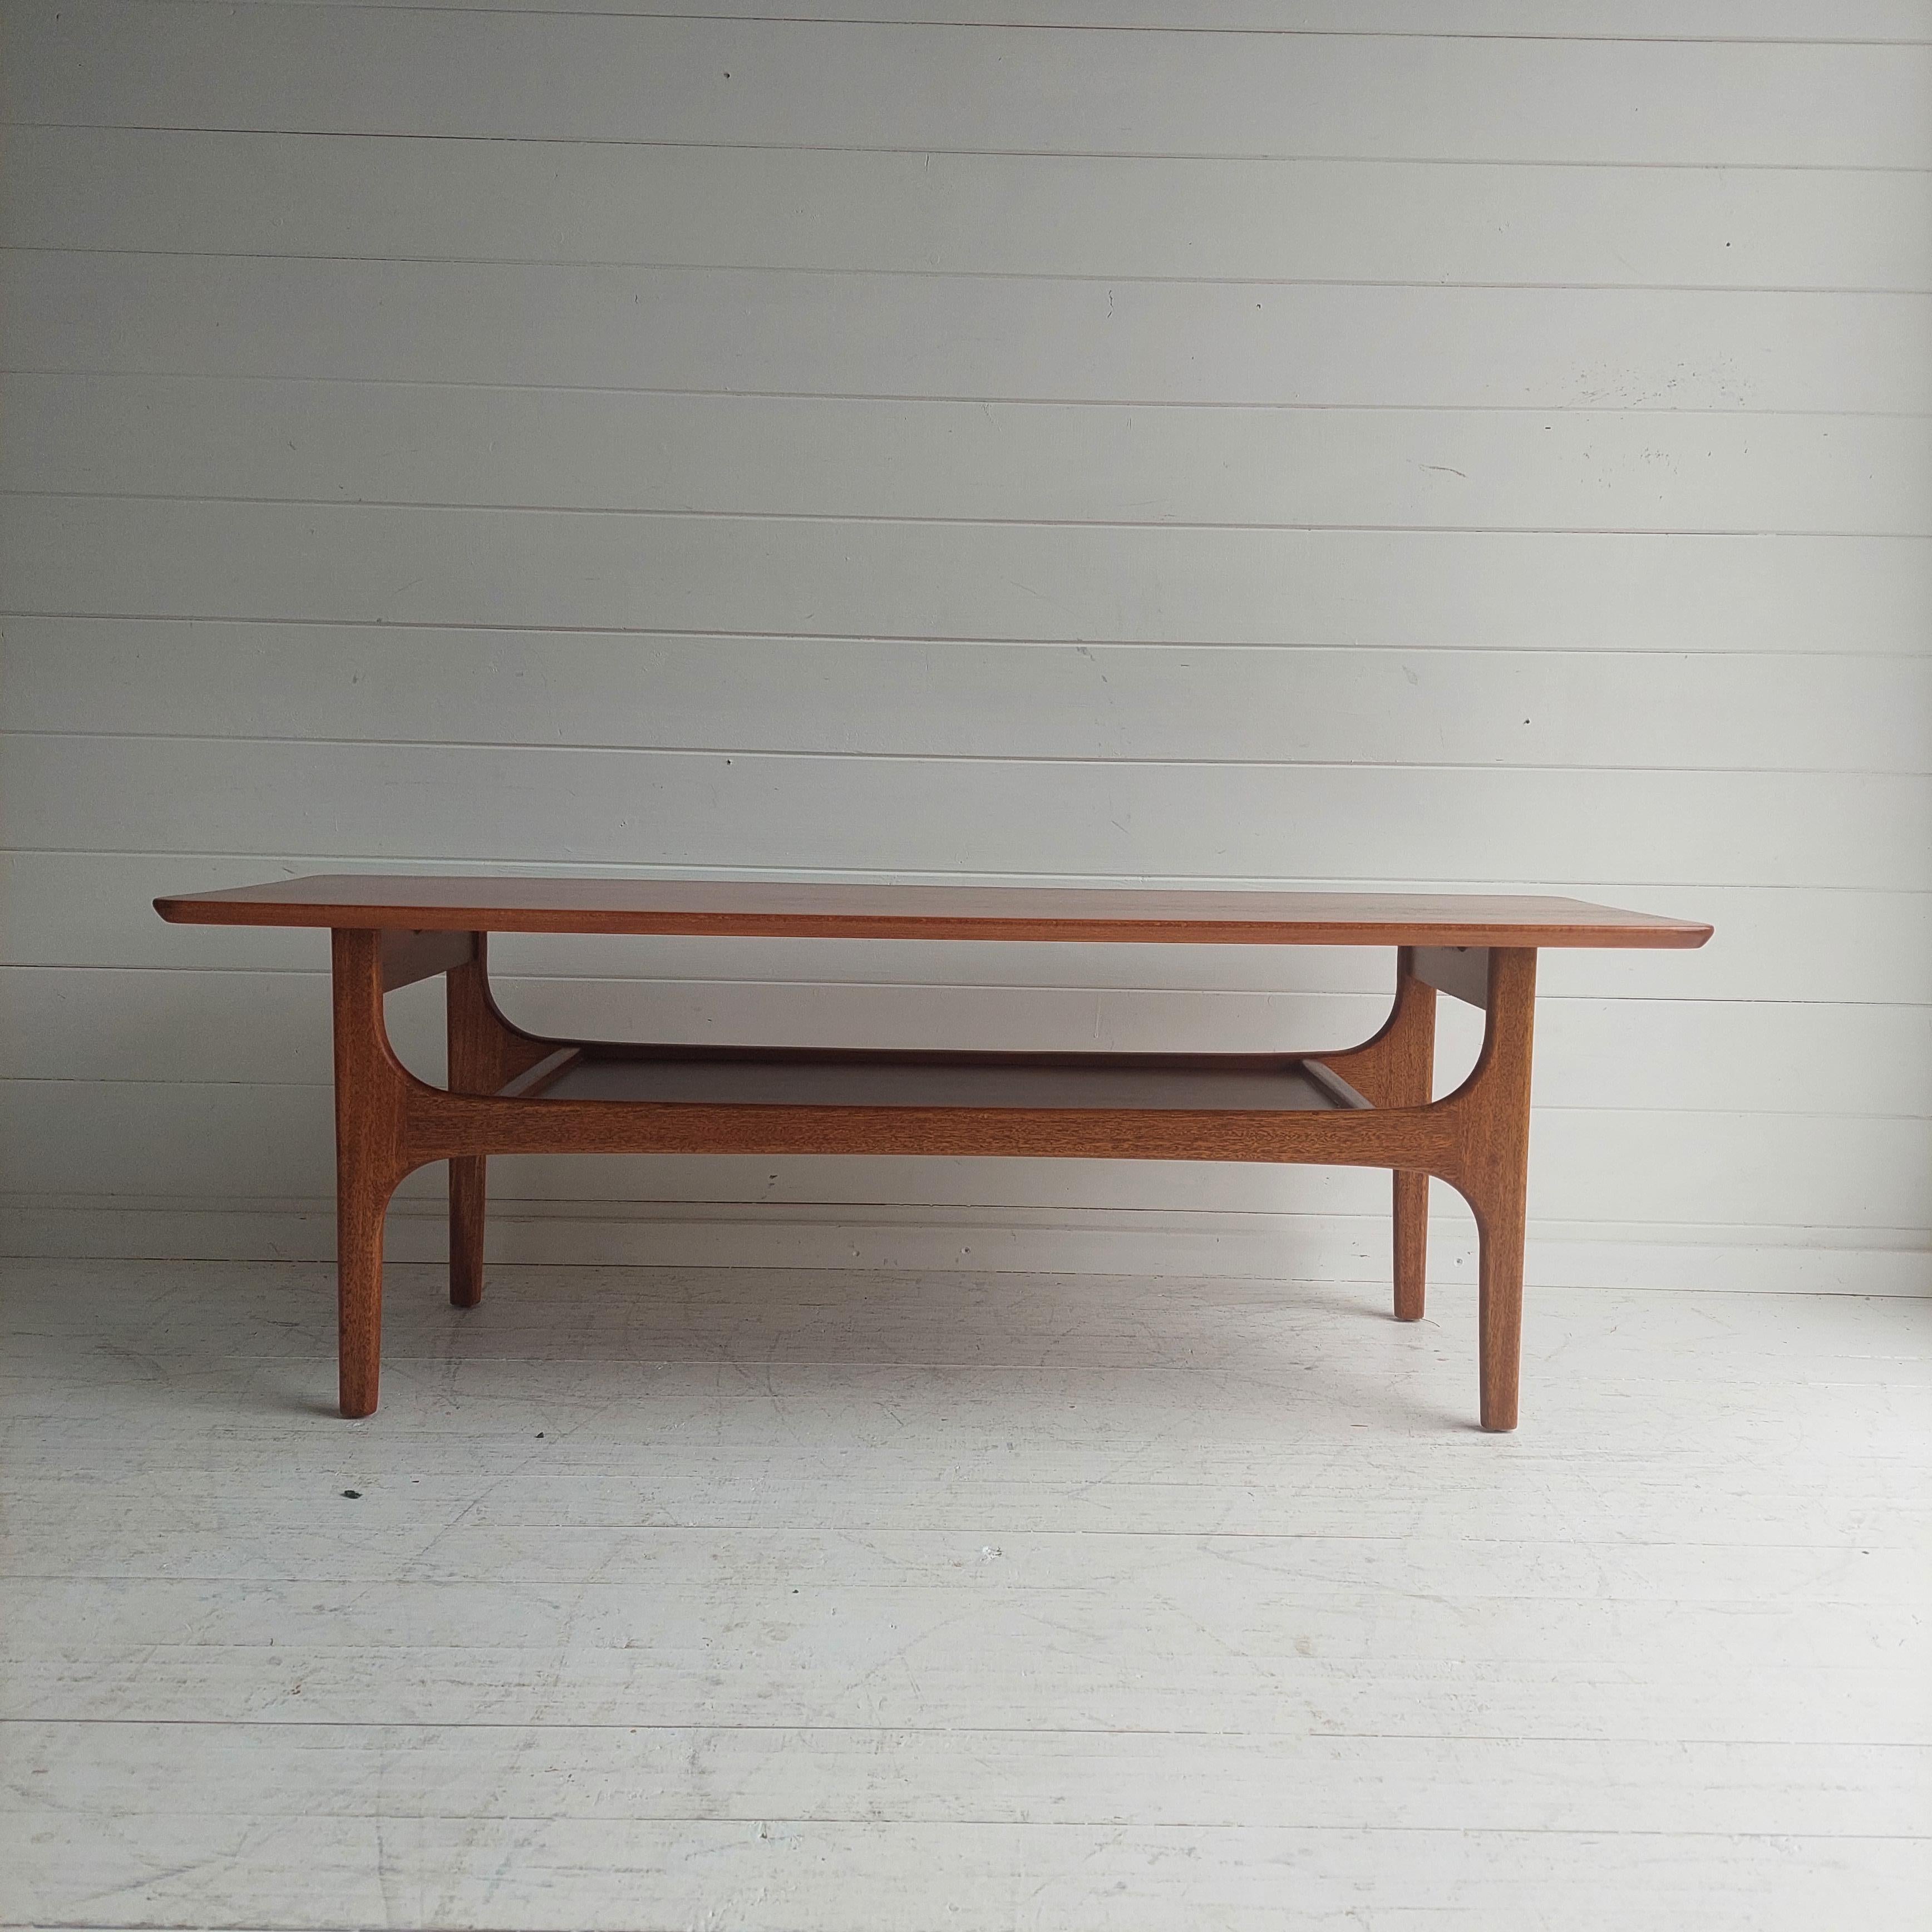 Stunning mid 20th century coffee table by Jentique (Model - Stingray, c.1960). 

Crafted from quality teak and beech with captivating grain detailing and beautiful sculptural joinery. 
A two tier coffee table with fabulous form, featuring a long